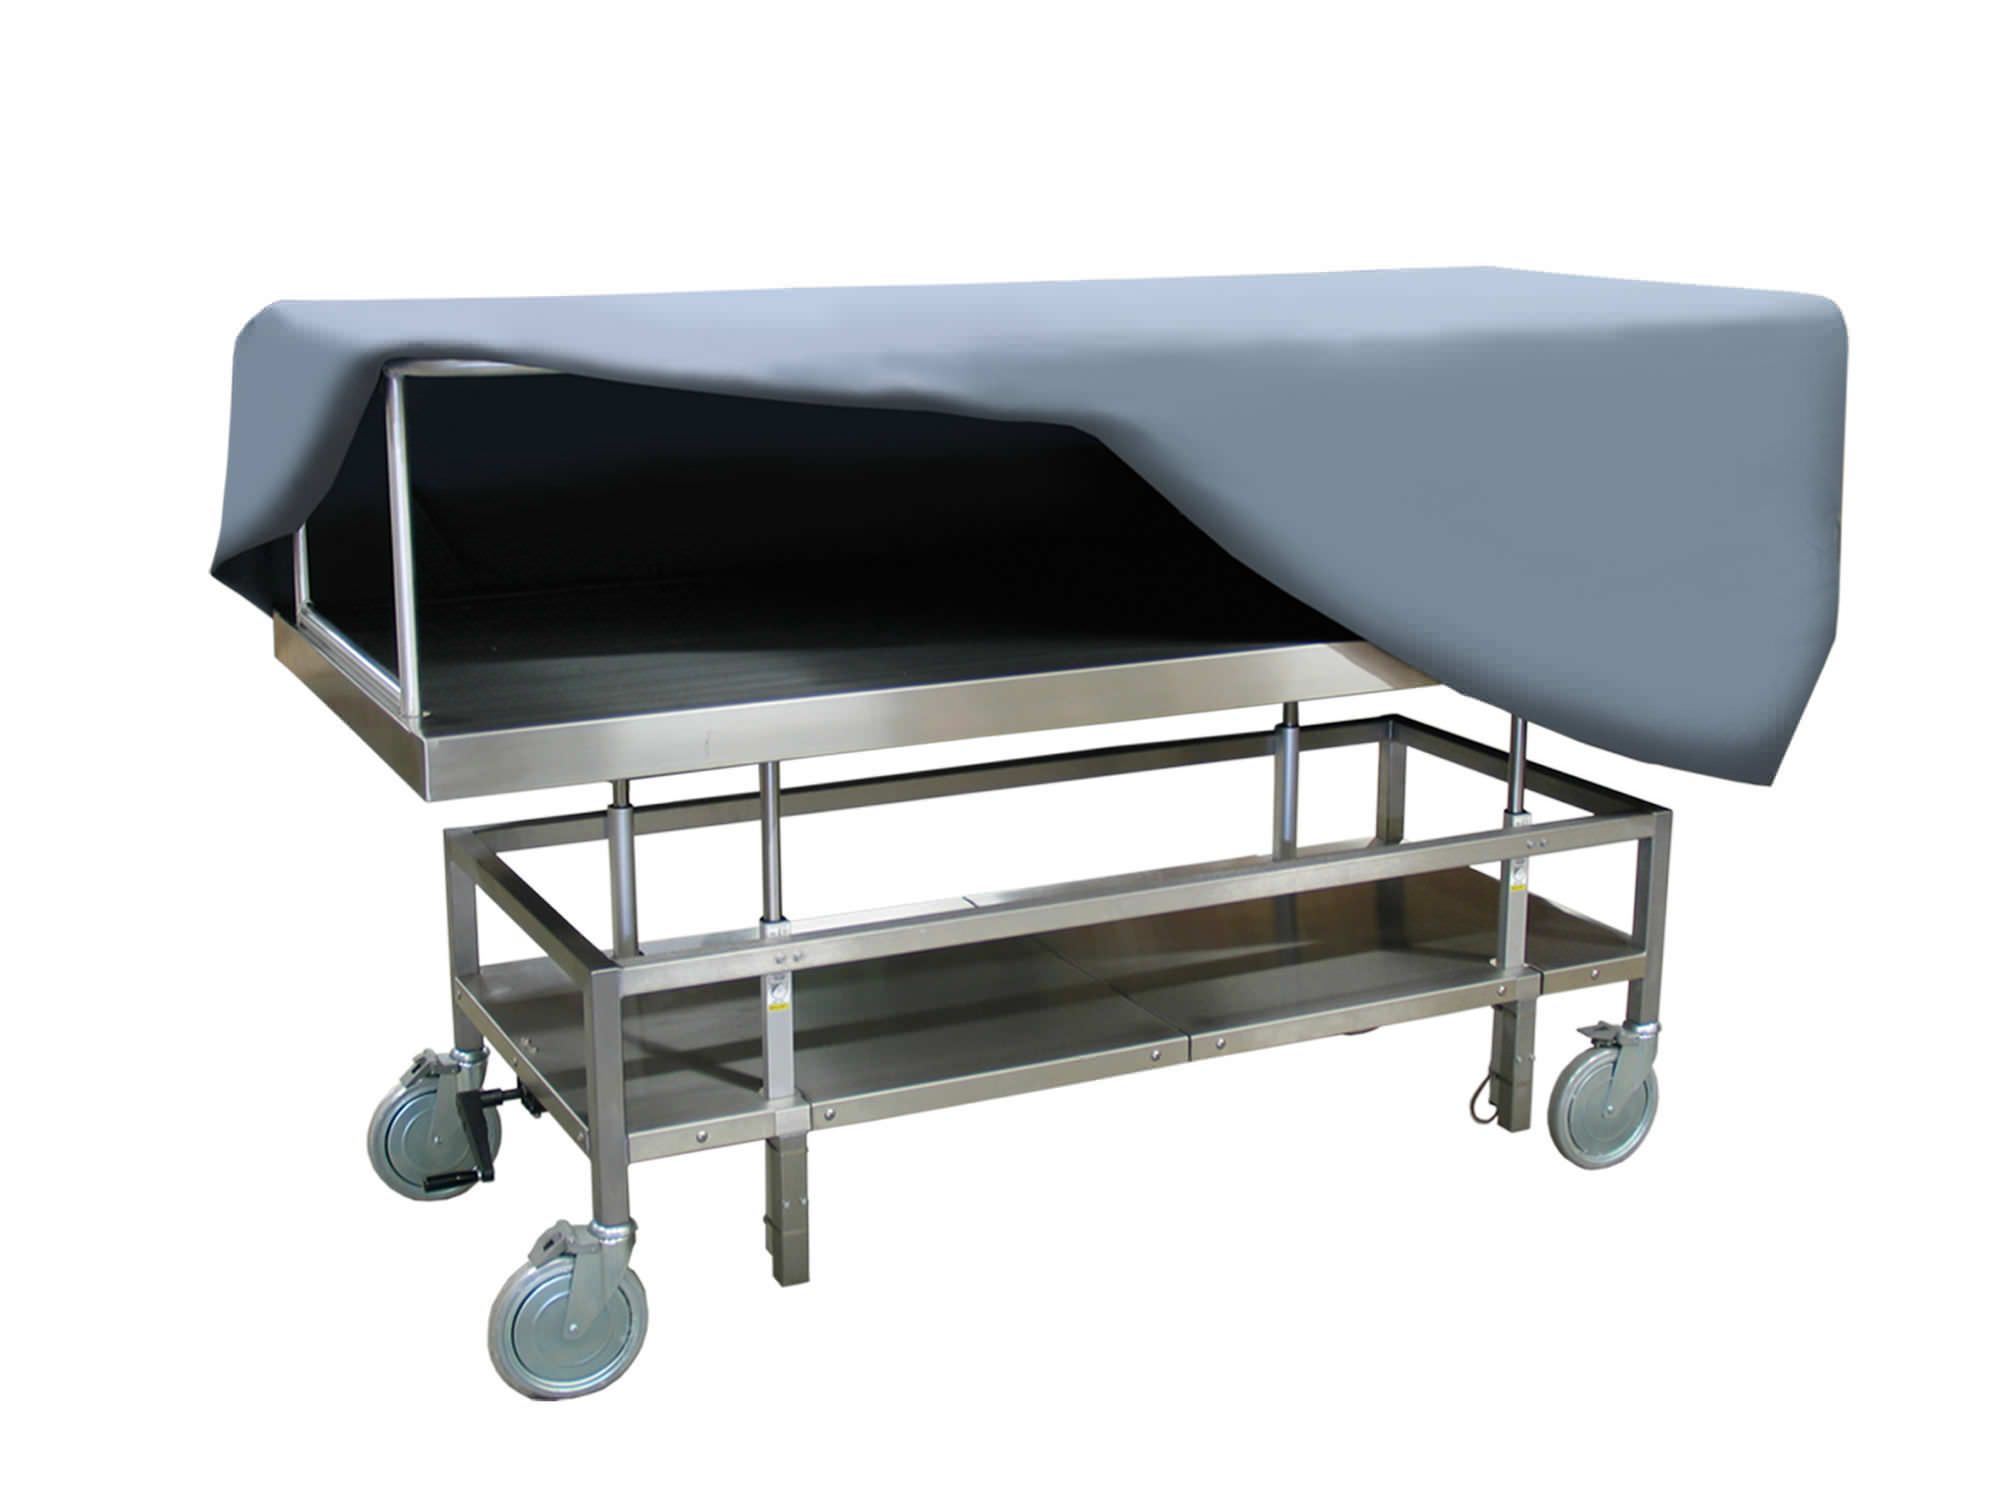 Transport trolley / mortuary / stainless steel 600039-1K Mortech Manufacturing